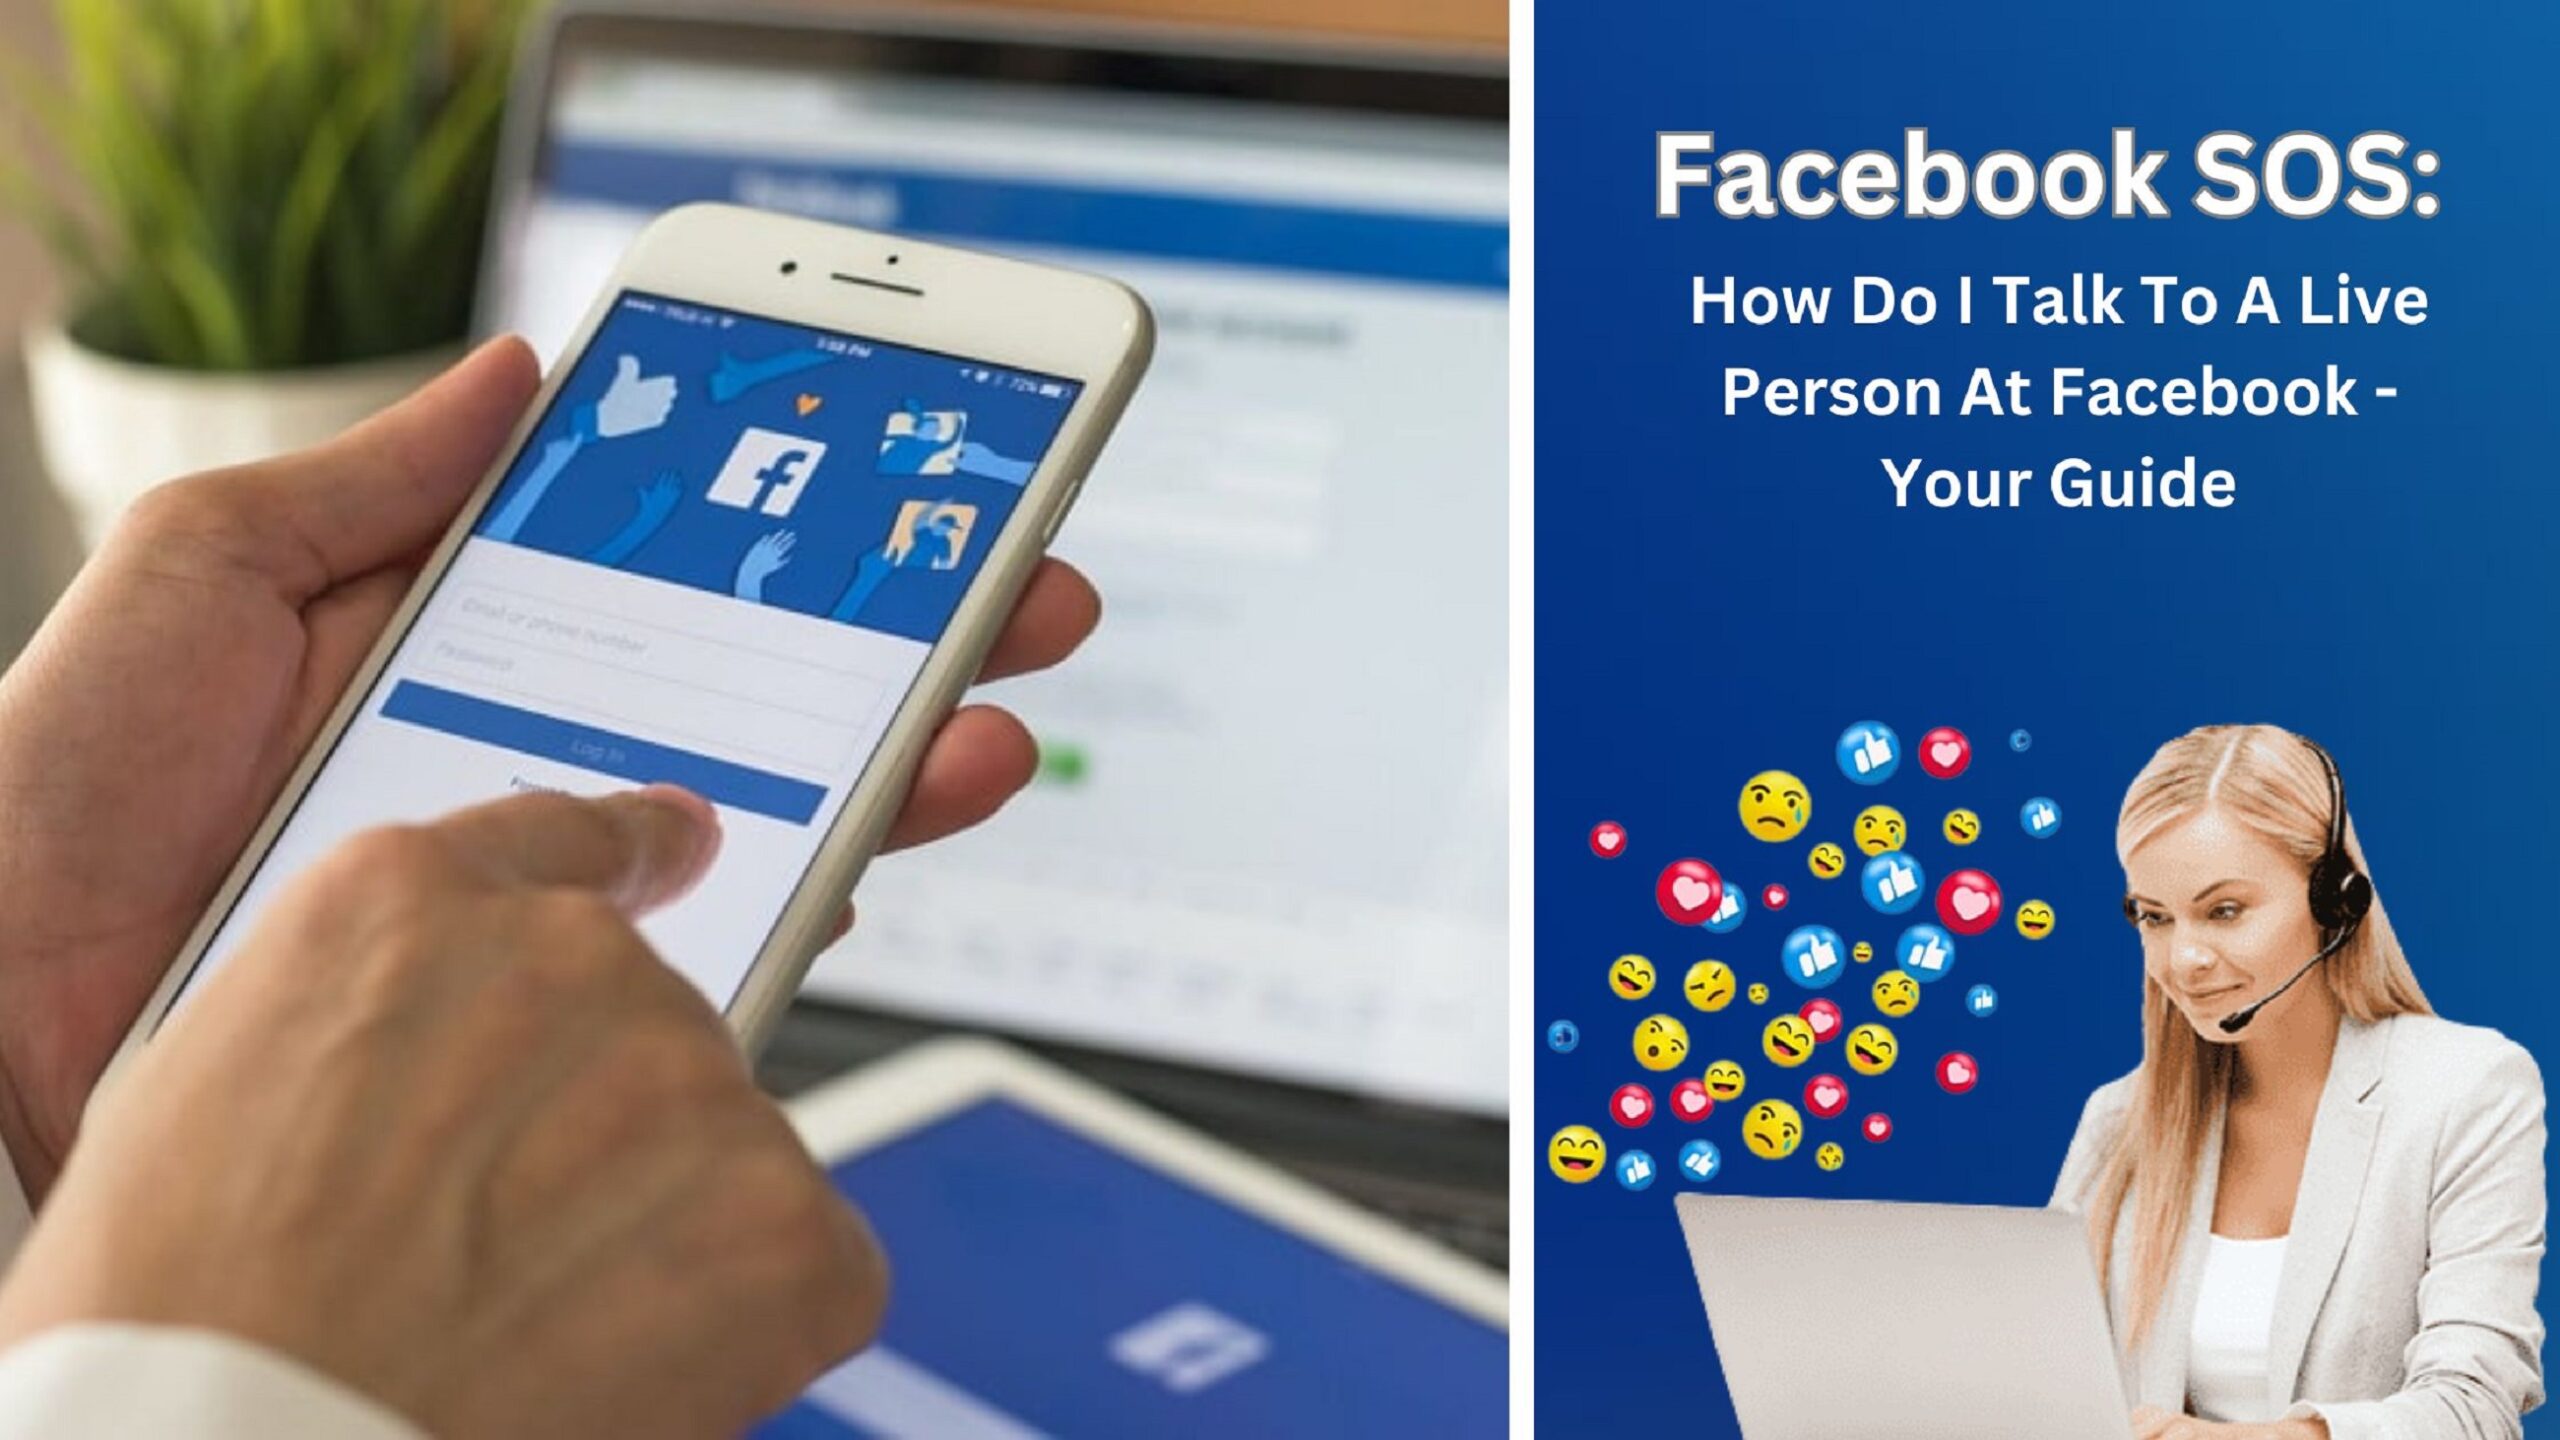 Facebook SOS: How Do I Talk To A Live Person At Facebook – Your Guide